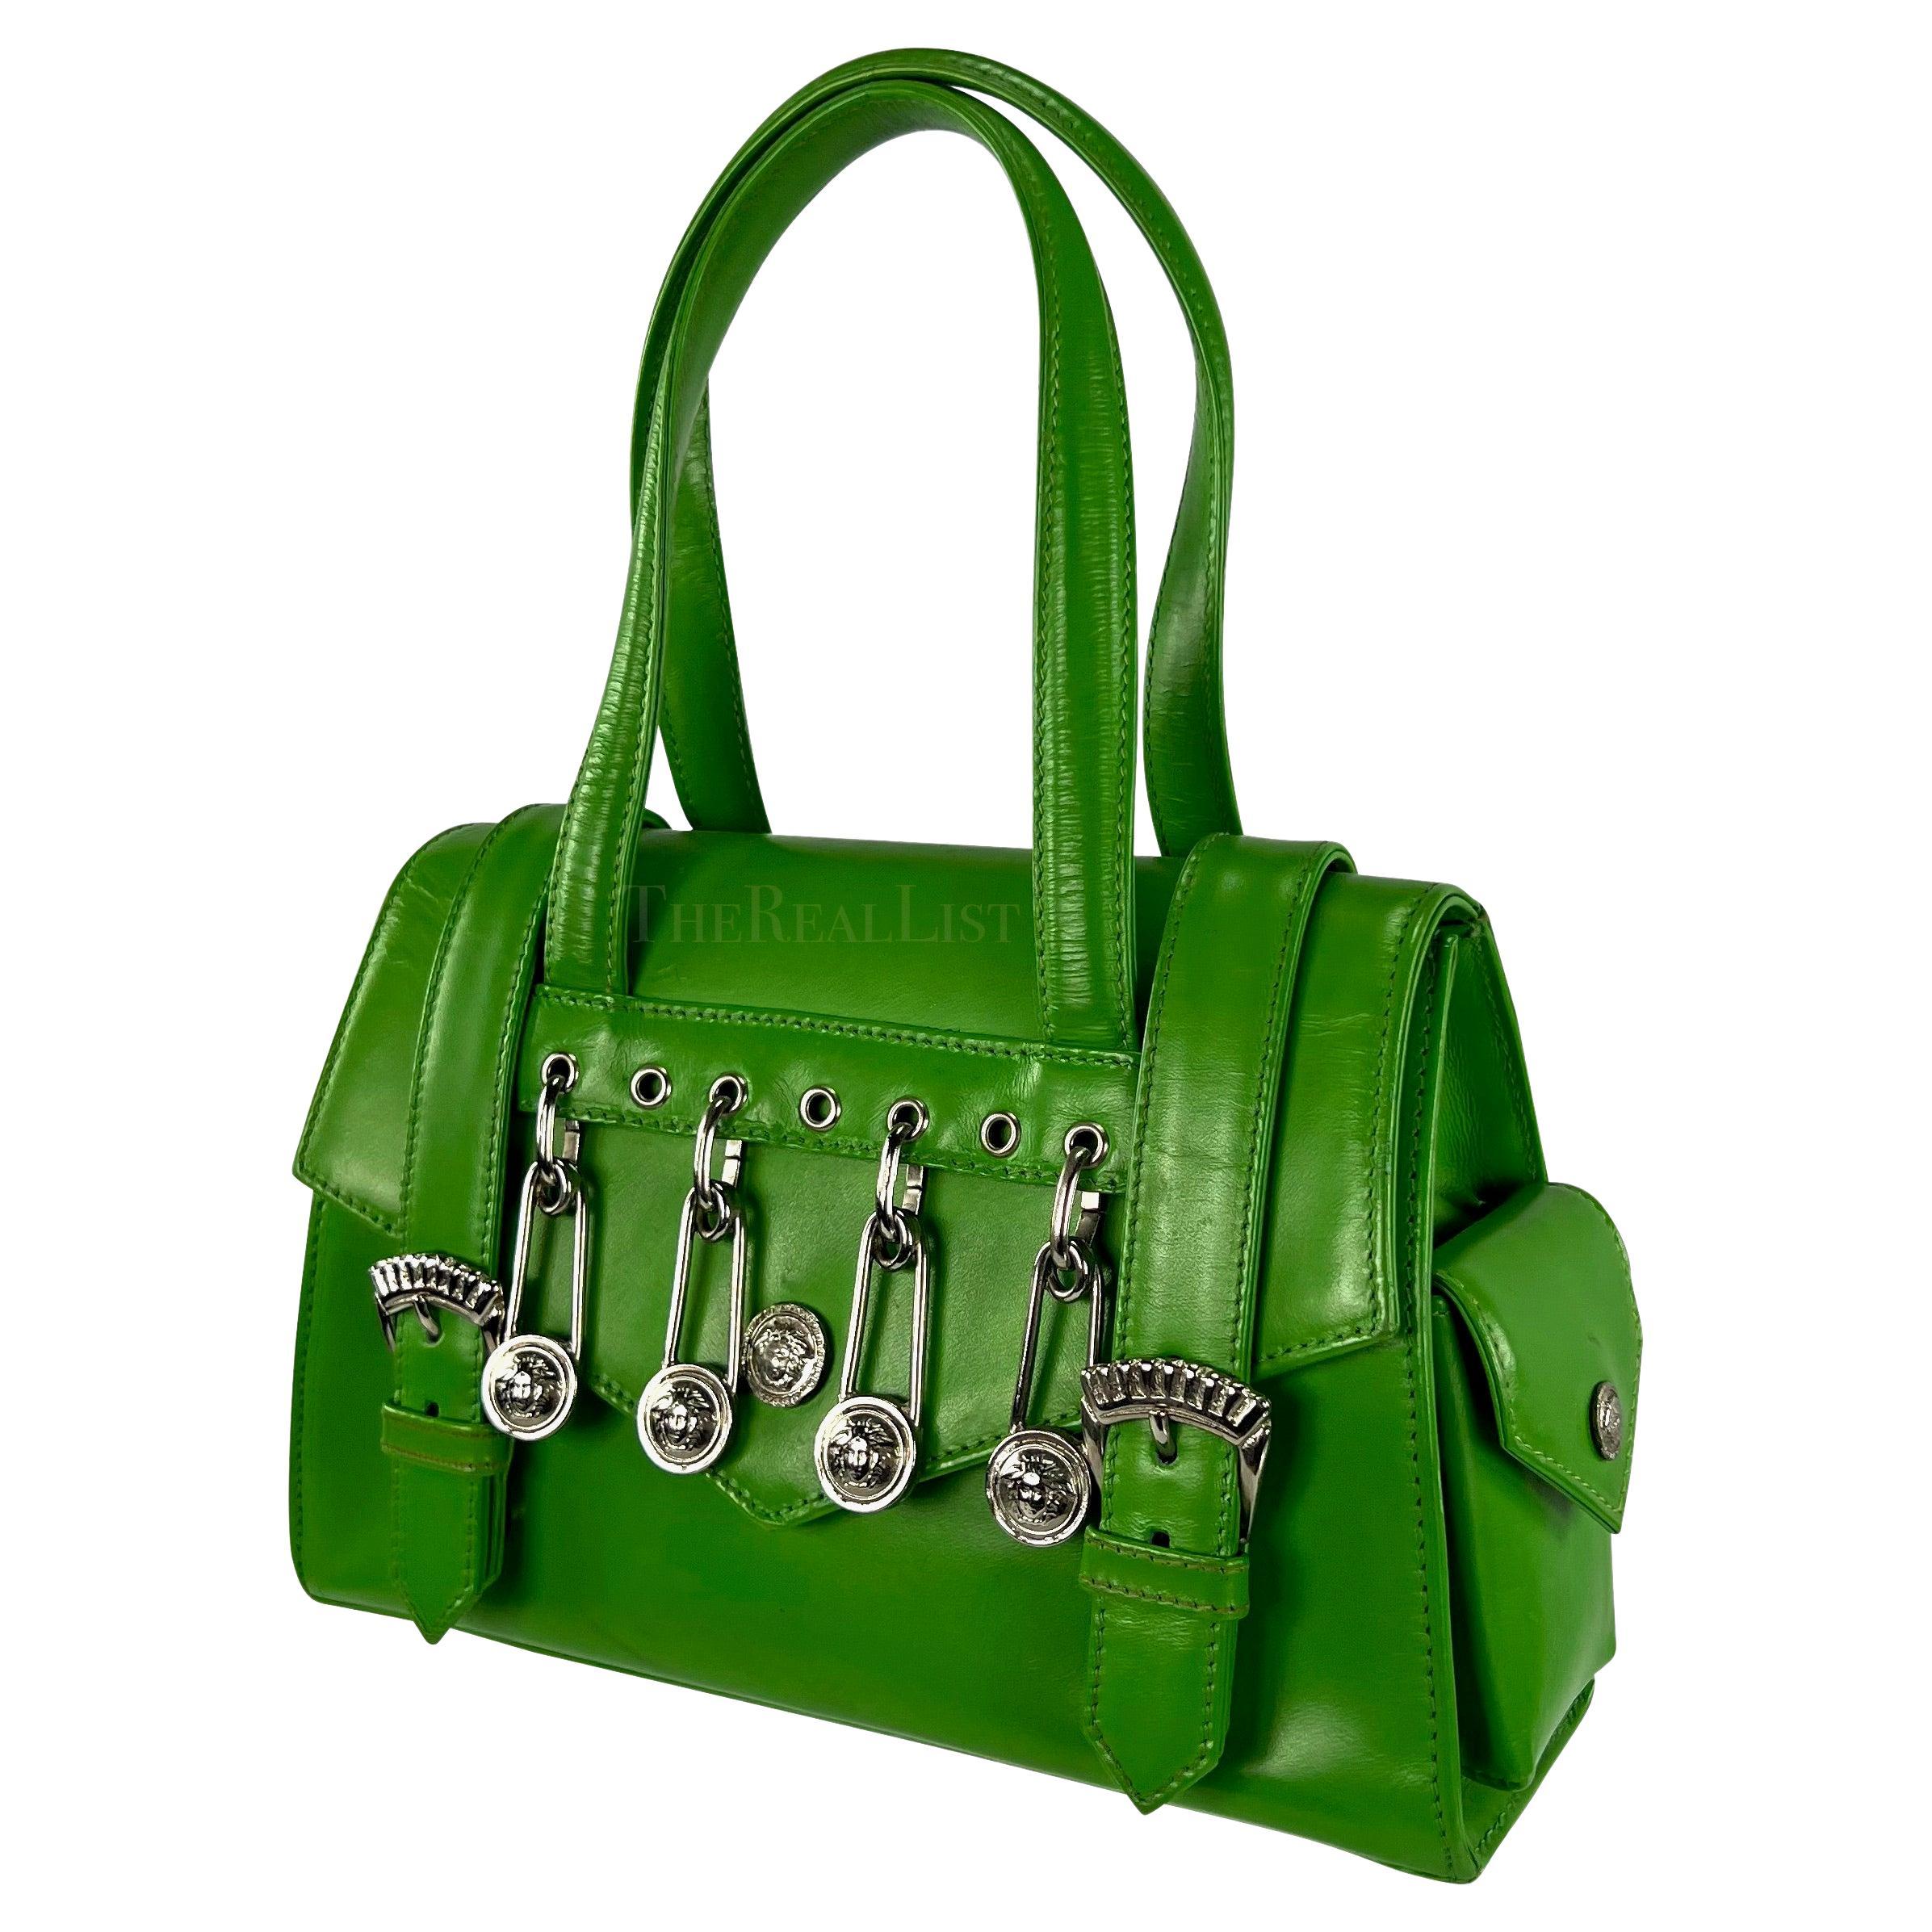 Presenting a fabulous bright green Gianni Versace safety pin mini bag, designed by Gianni Versace. A legendary creation from Gianni Versace's S/S 1994 collection, forever intertwined with Elizabeth Hurley's iconic 'Safety Pin' dress. This petite bag